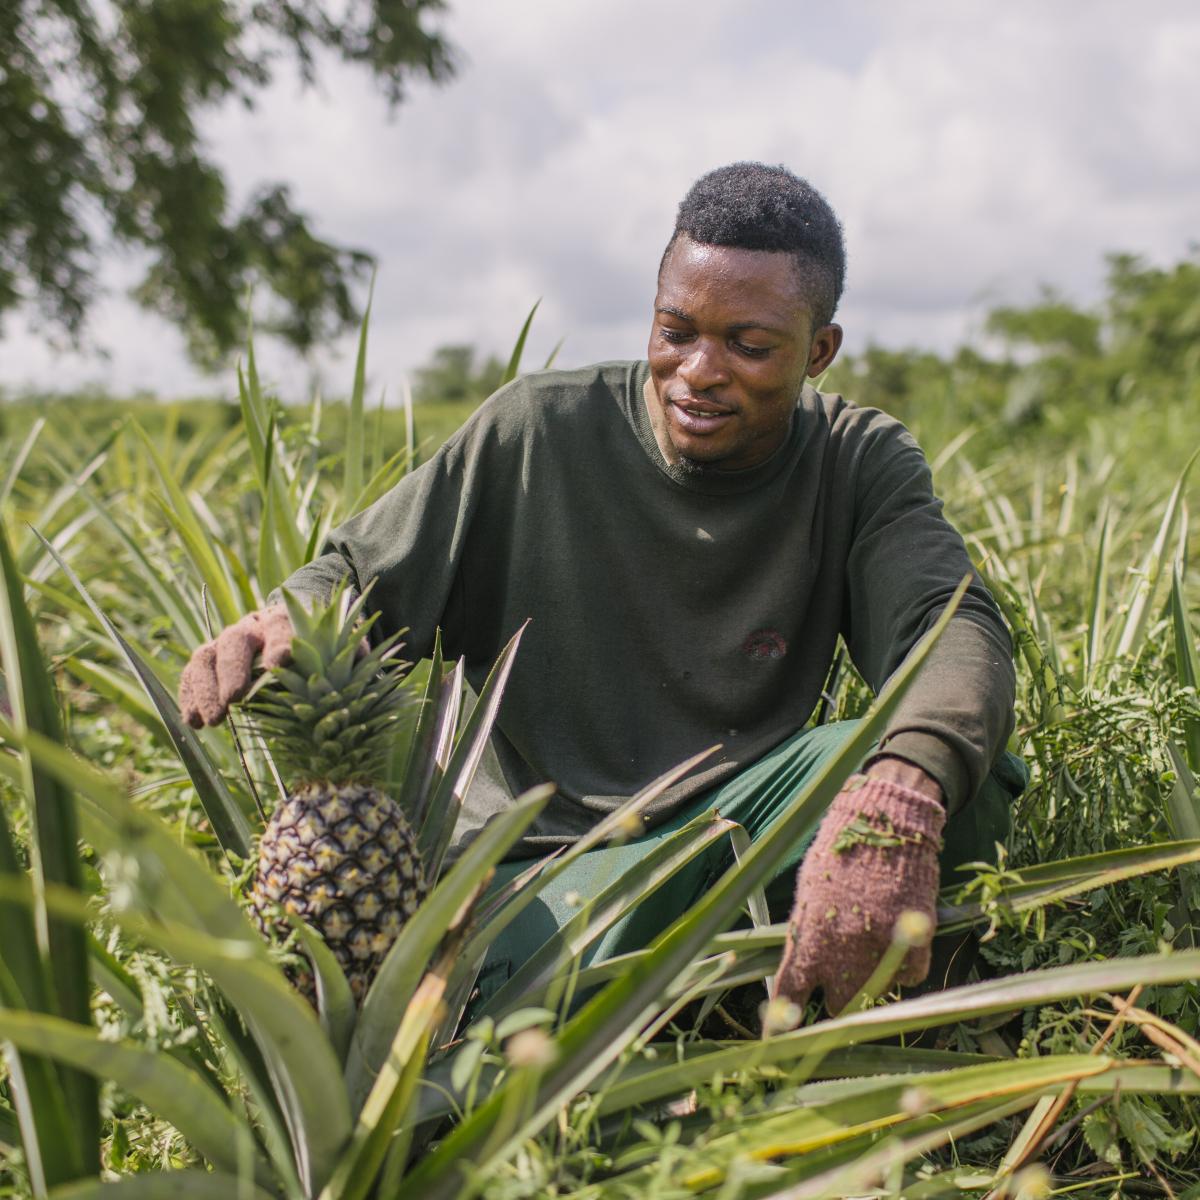 Farmer looks at a pineapple growing in a field.